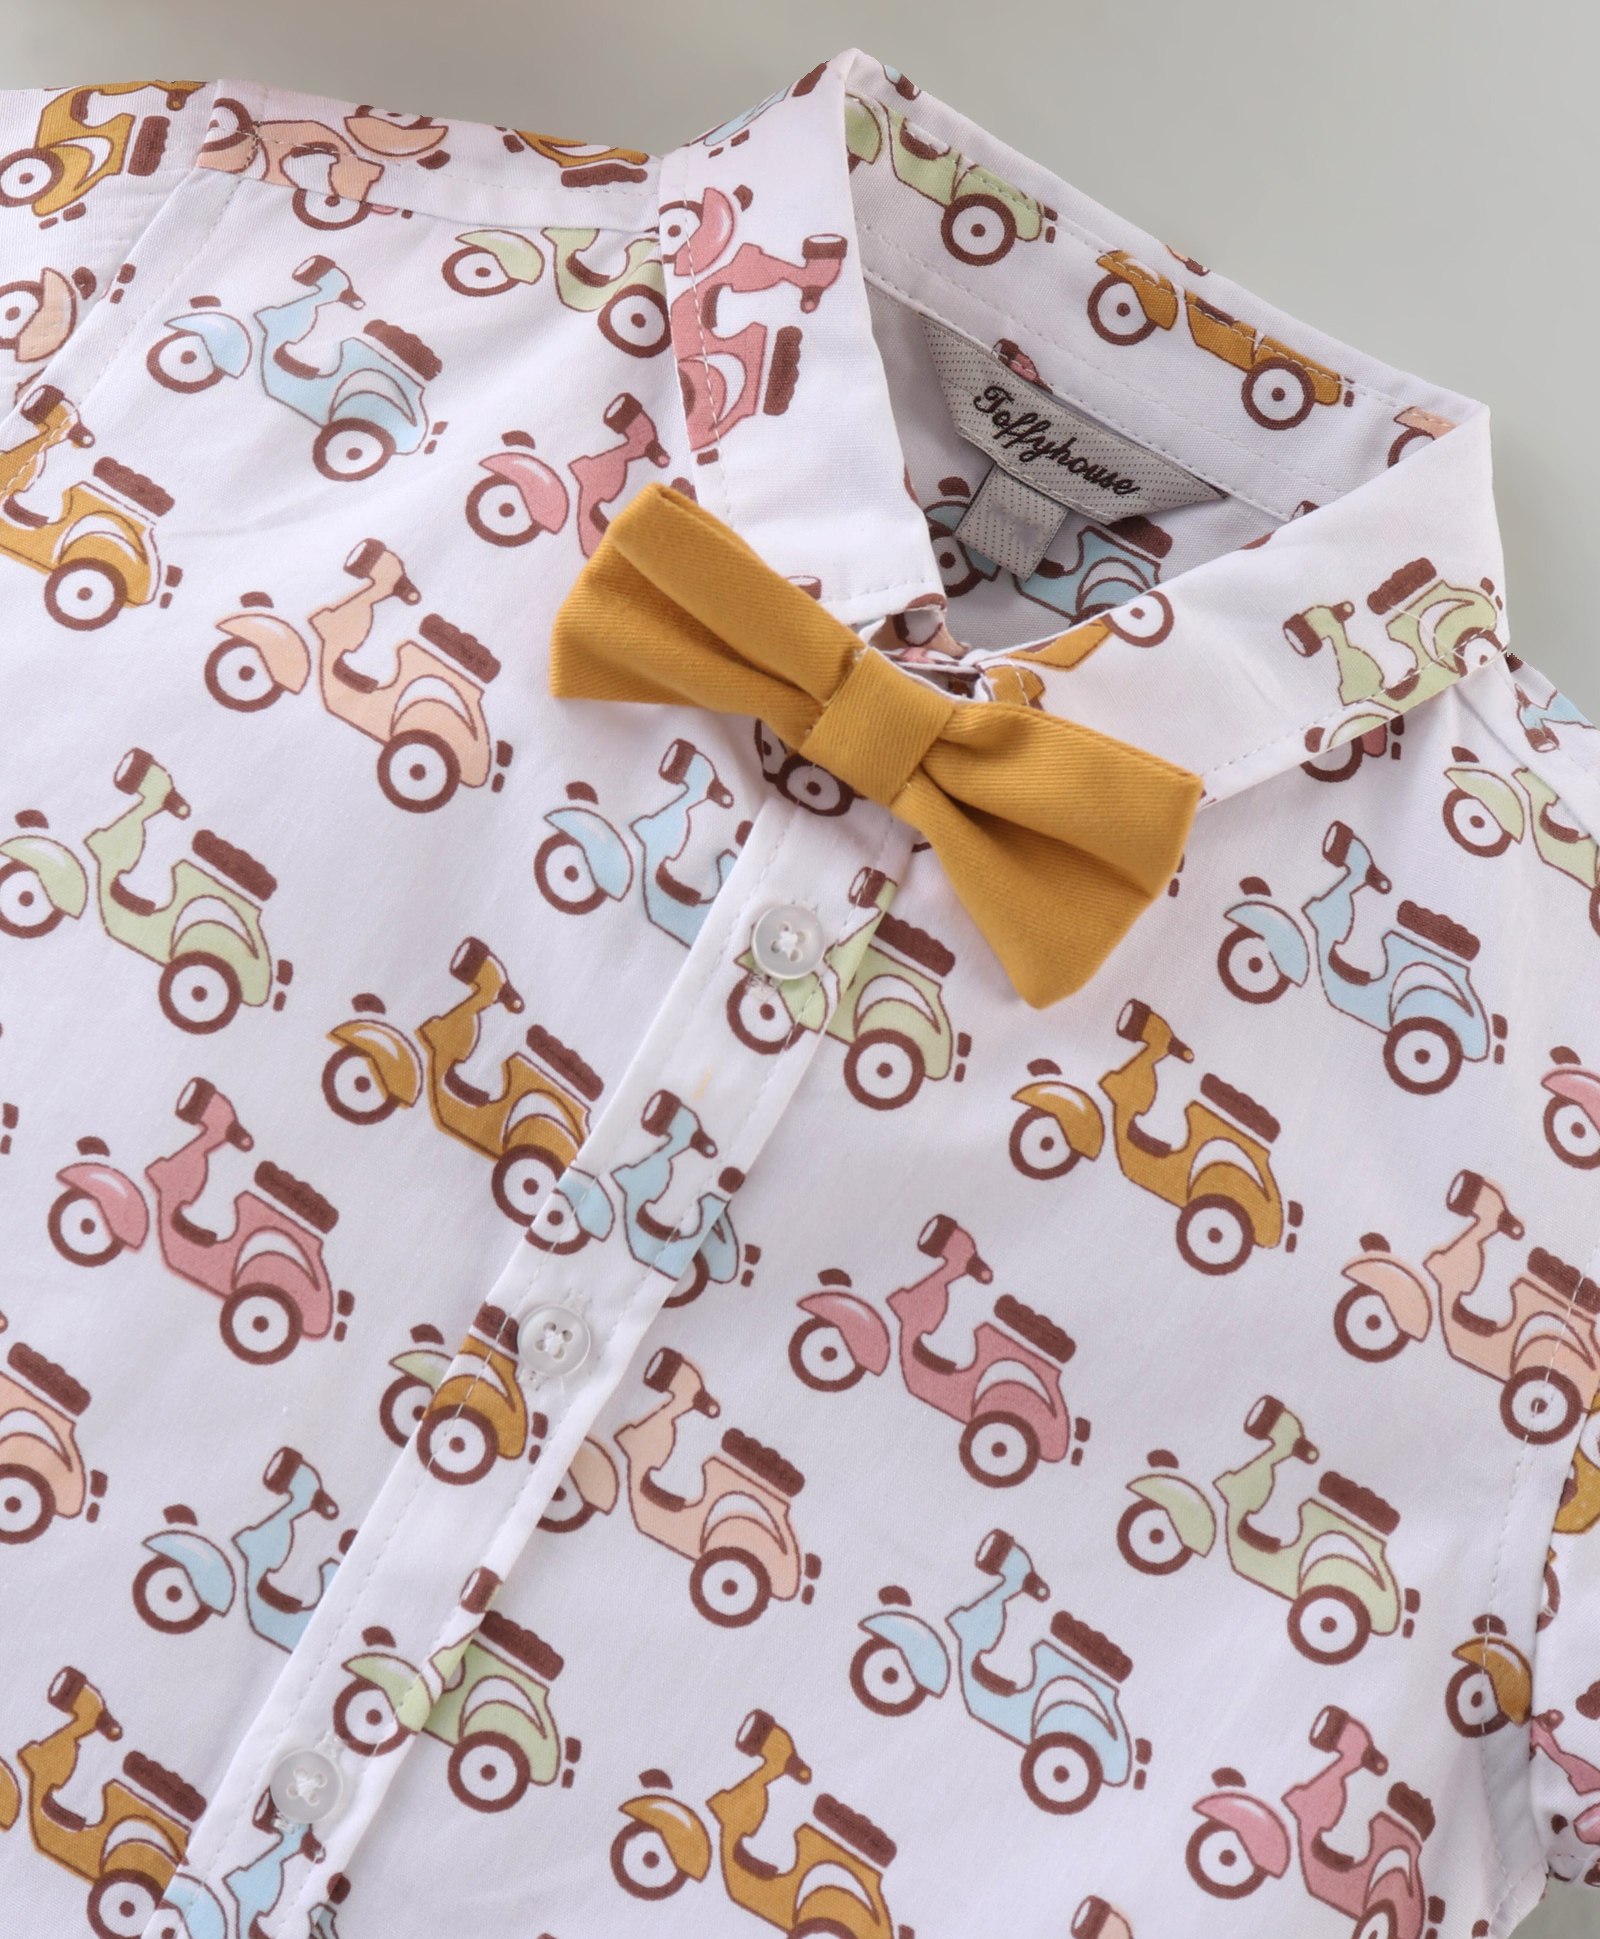 Half Sleeves Shirt & Shorts Set With Qwerky Suspender & Bow Scooter Print - White & Brown